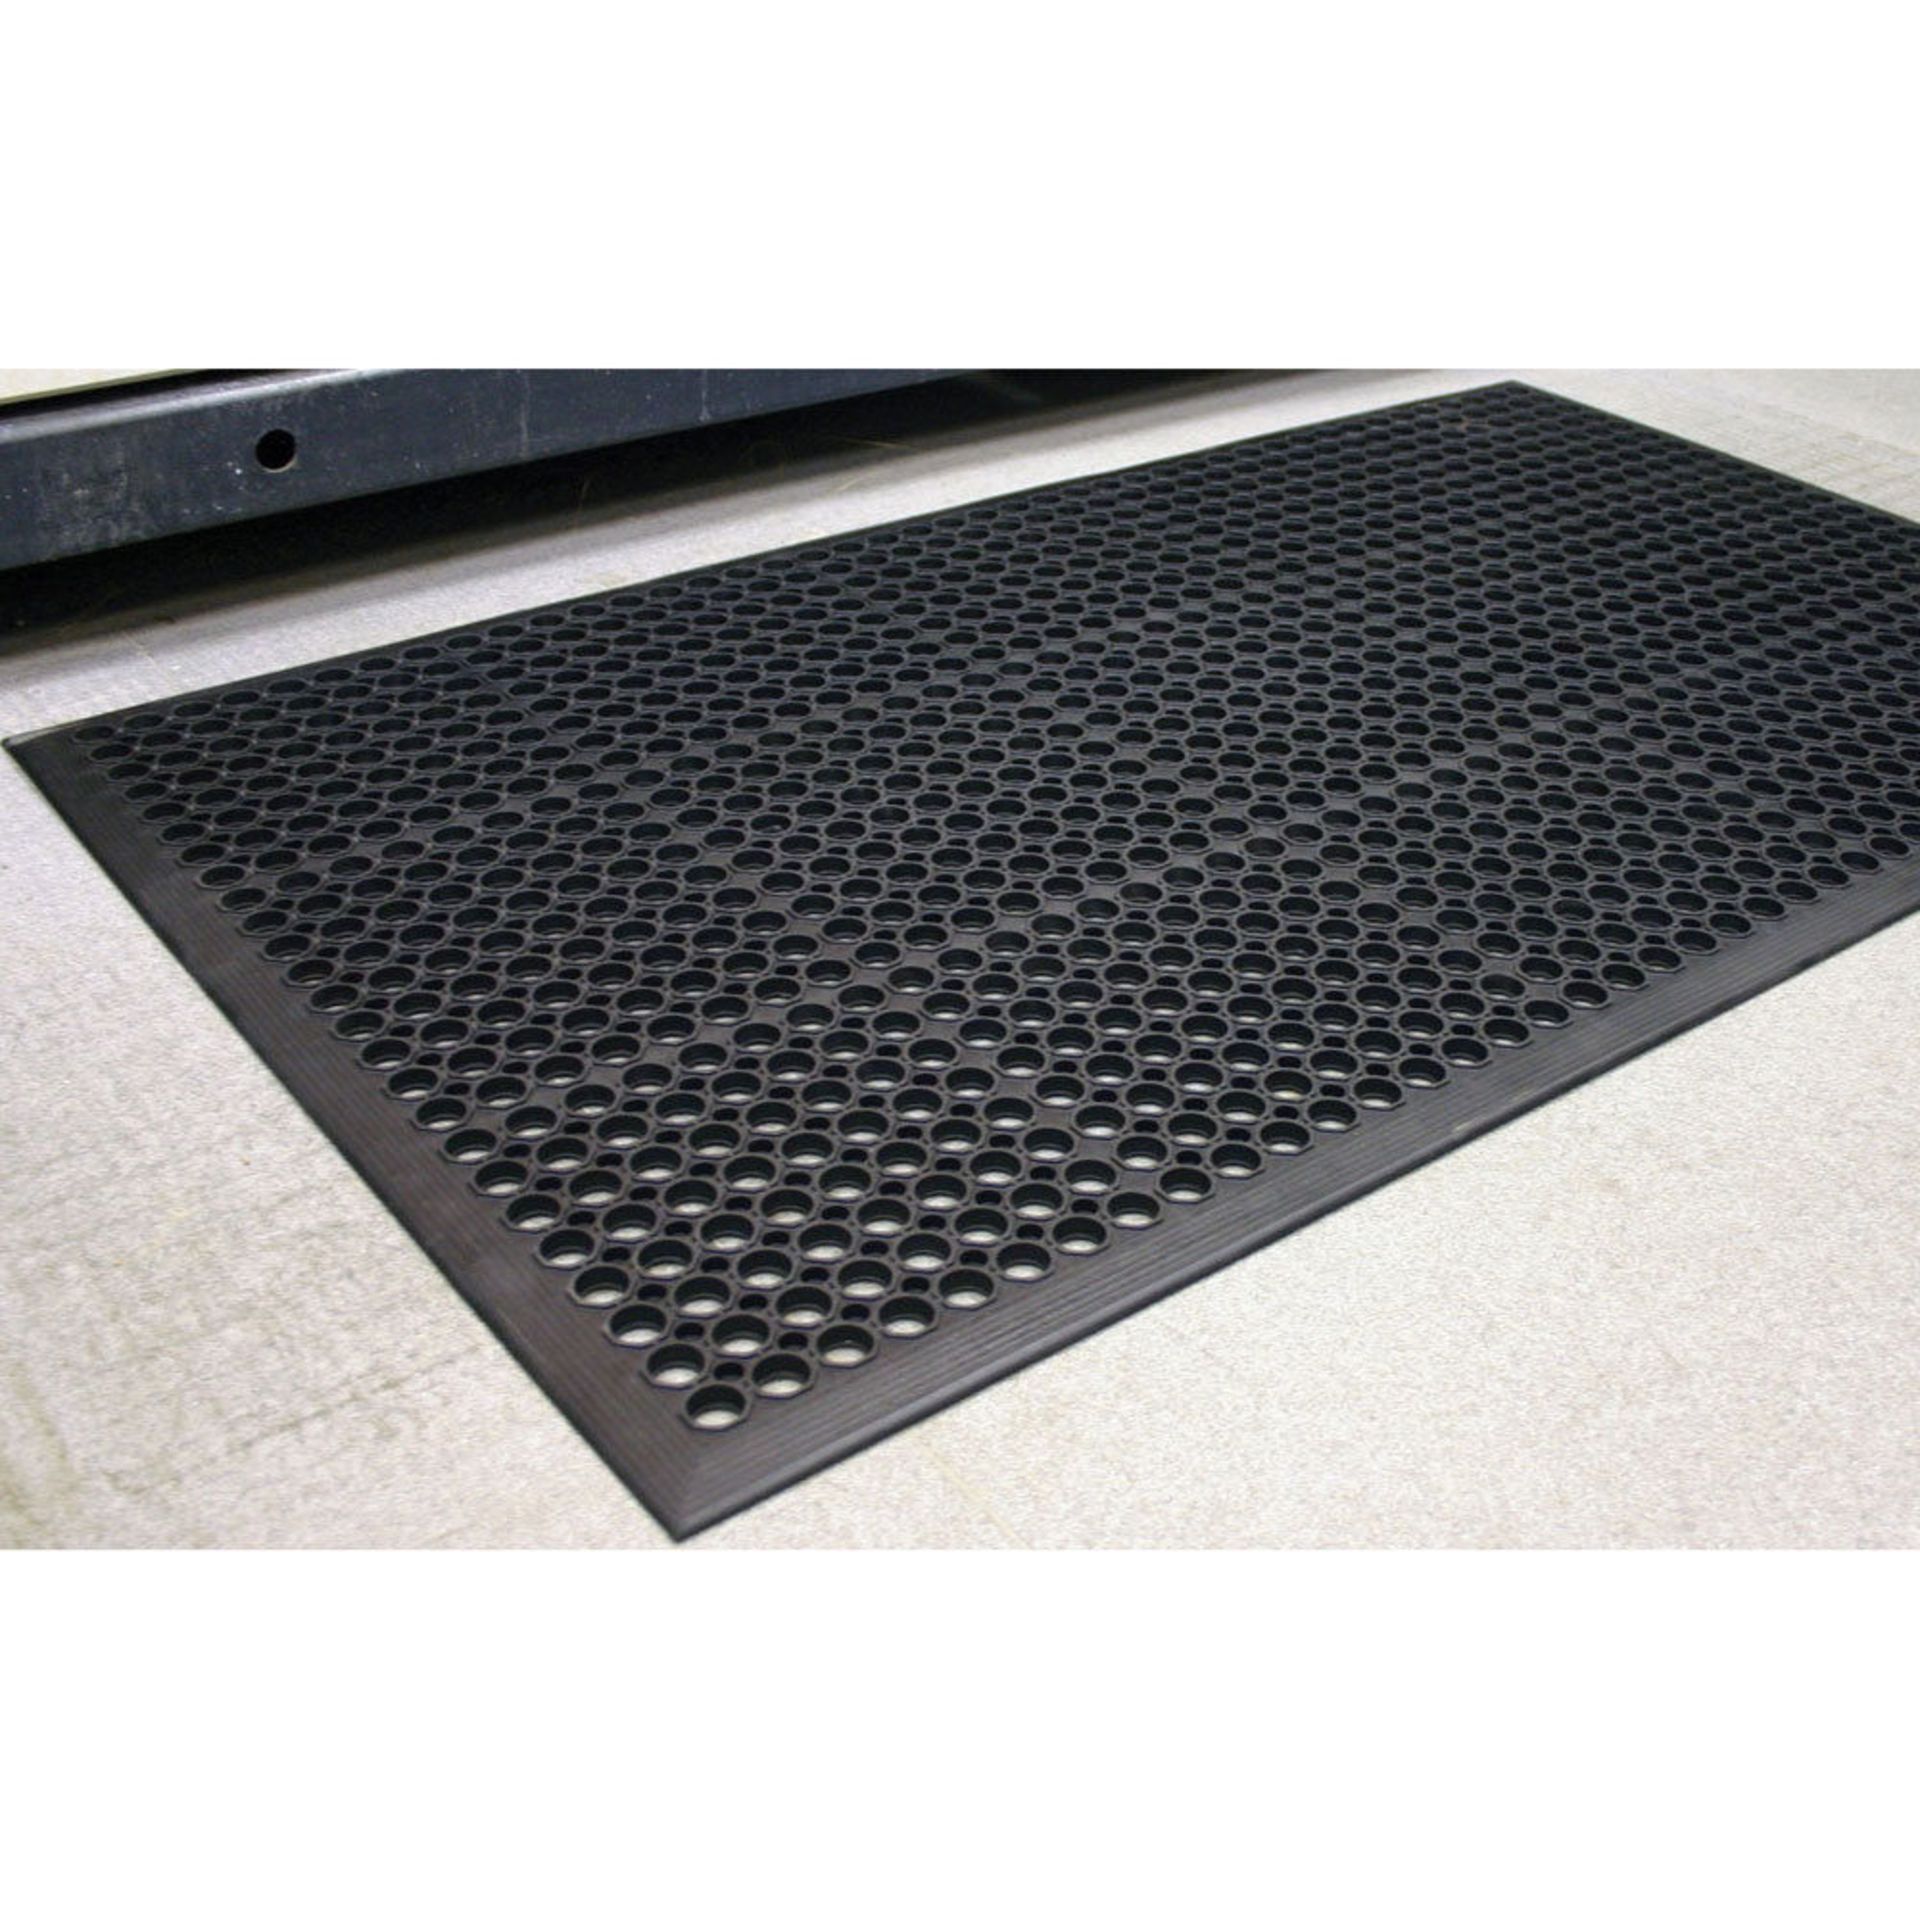 V Brand New 5 Pack Anti-Fatigue Mat Dimensions: 0.9 X 1.5 M - Thickness: 10 mm NOTE: Item is held in